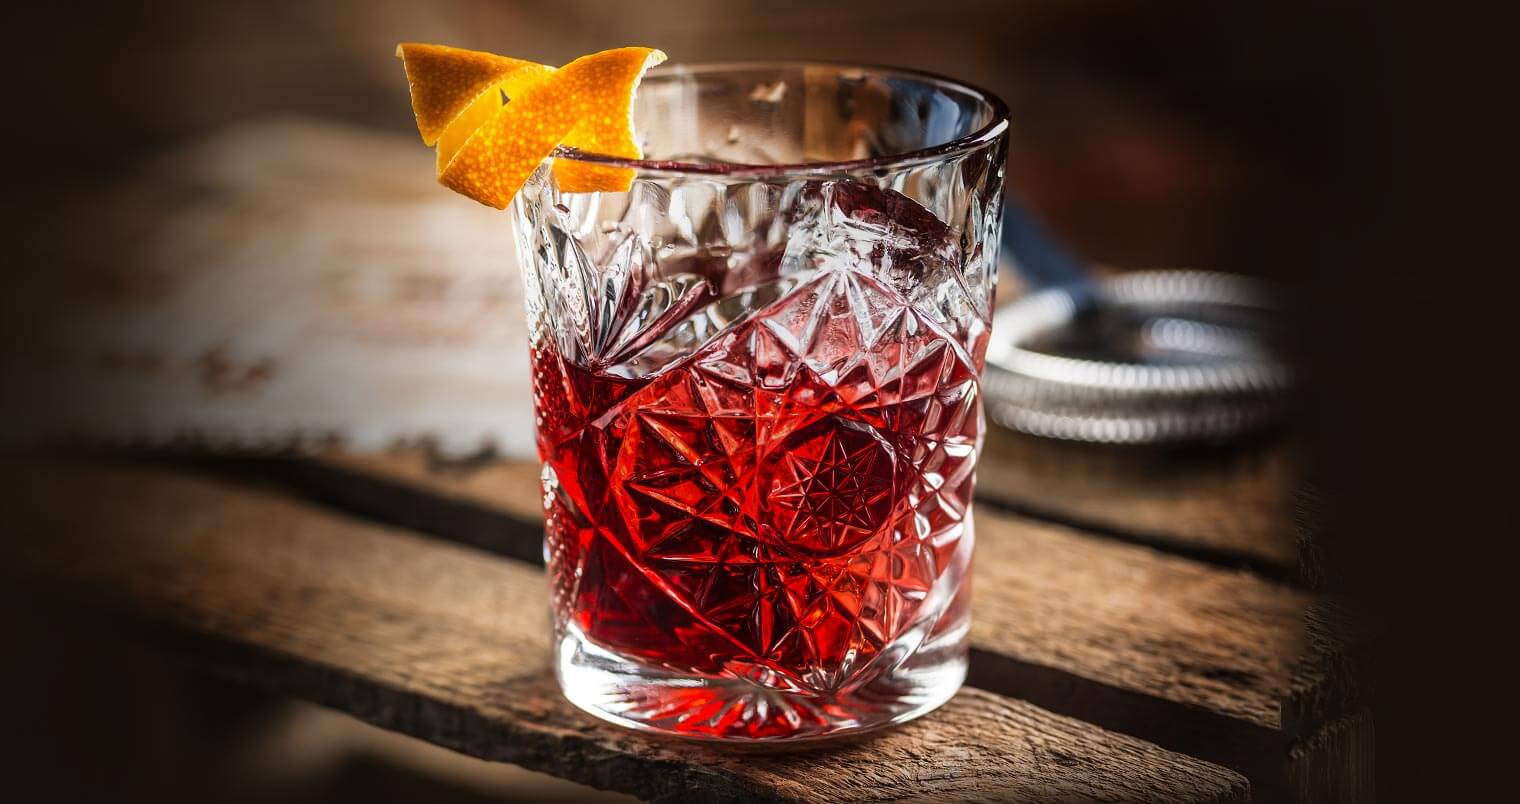 The Perfect Negroni, cocktail with garnish, wooden table, featured image